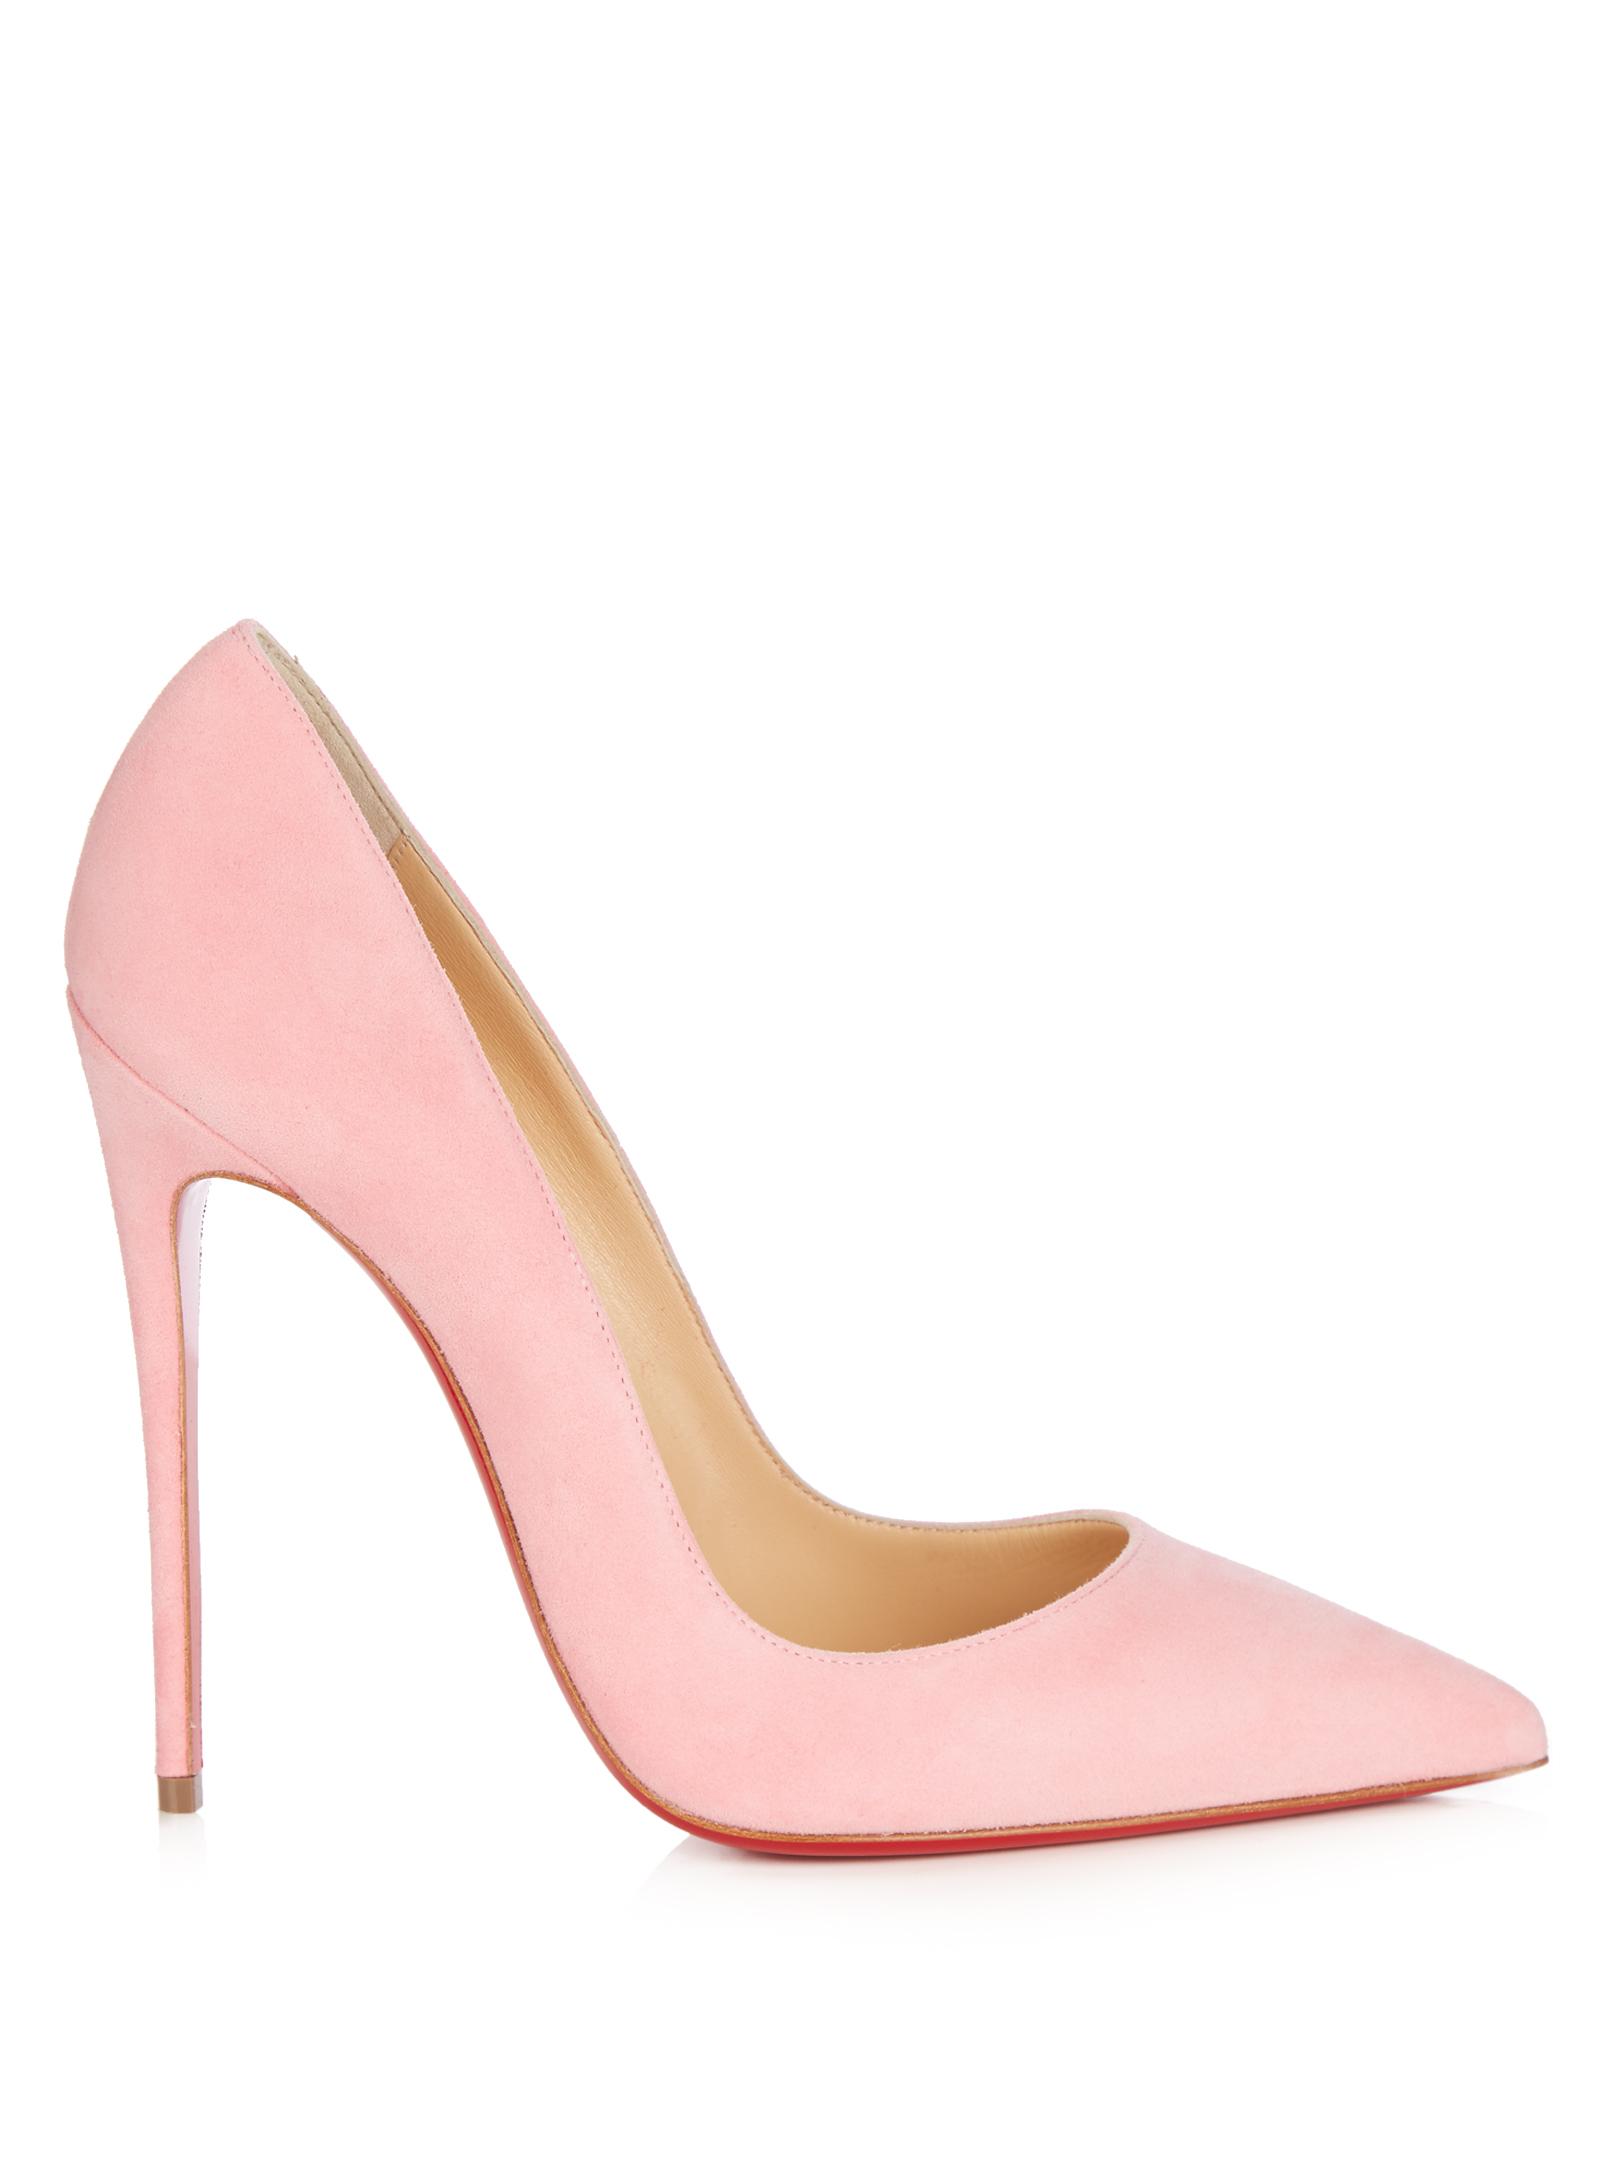 Christian Louboutin So Kate suede 120mm Pumps in Light Pink (Pink 